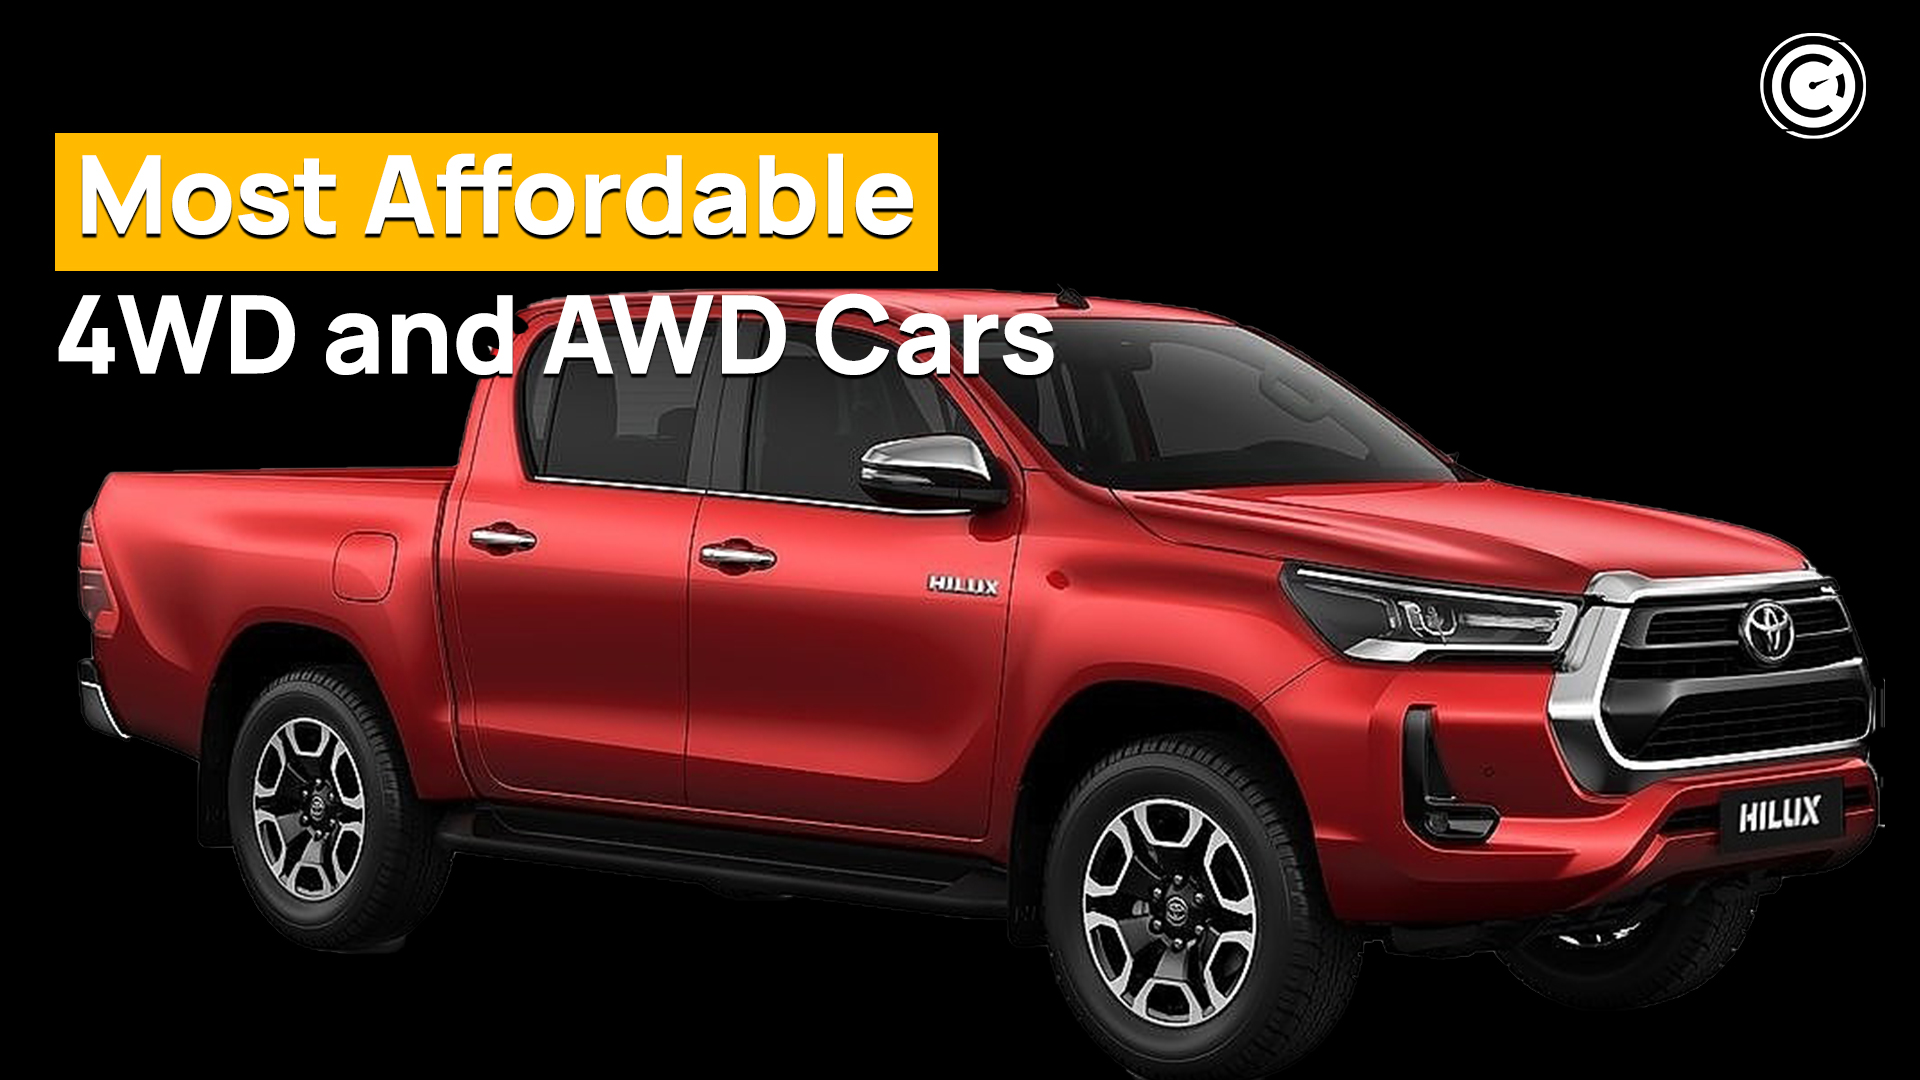 Most Affordable 4WD and AWD Cars